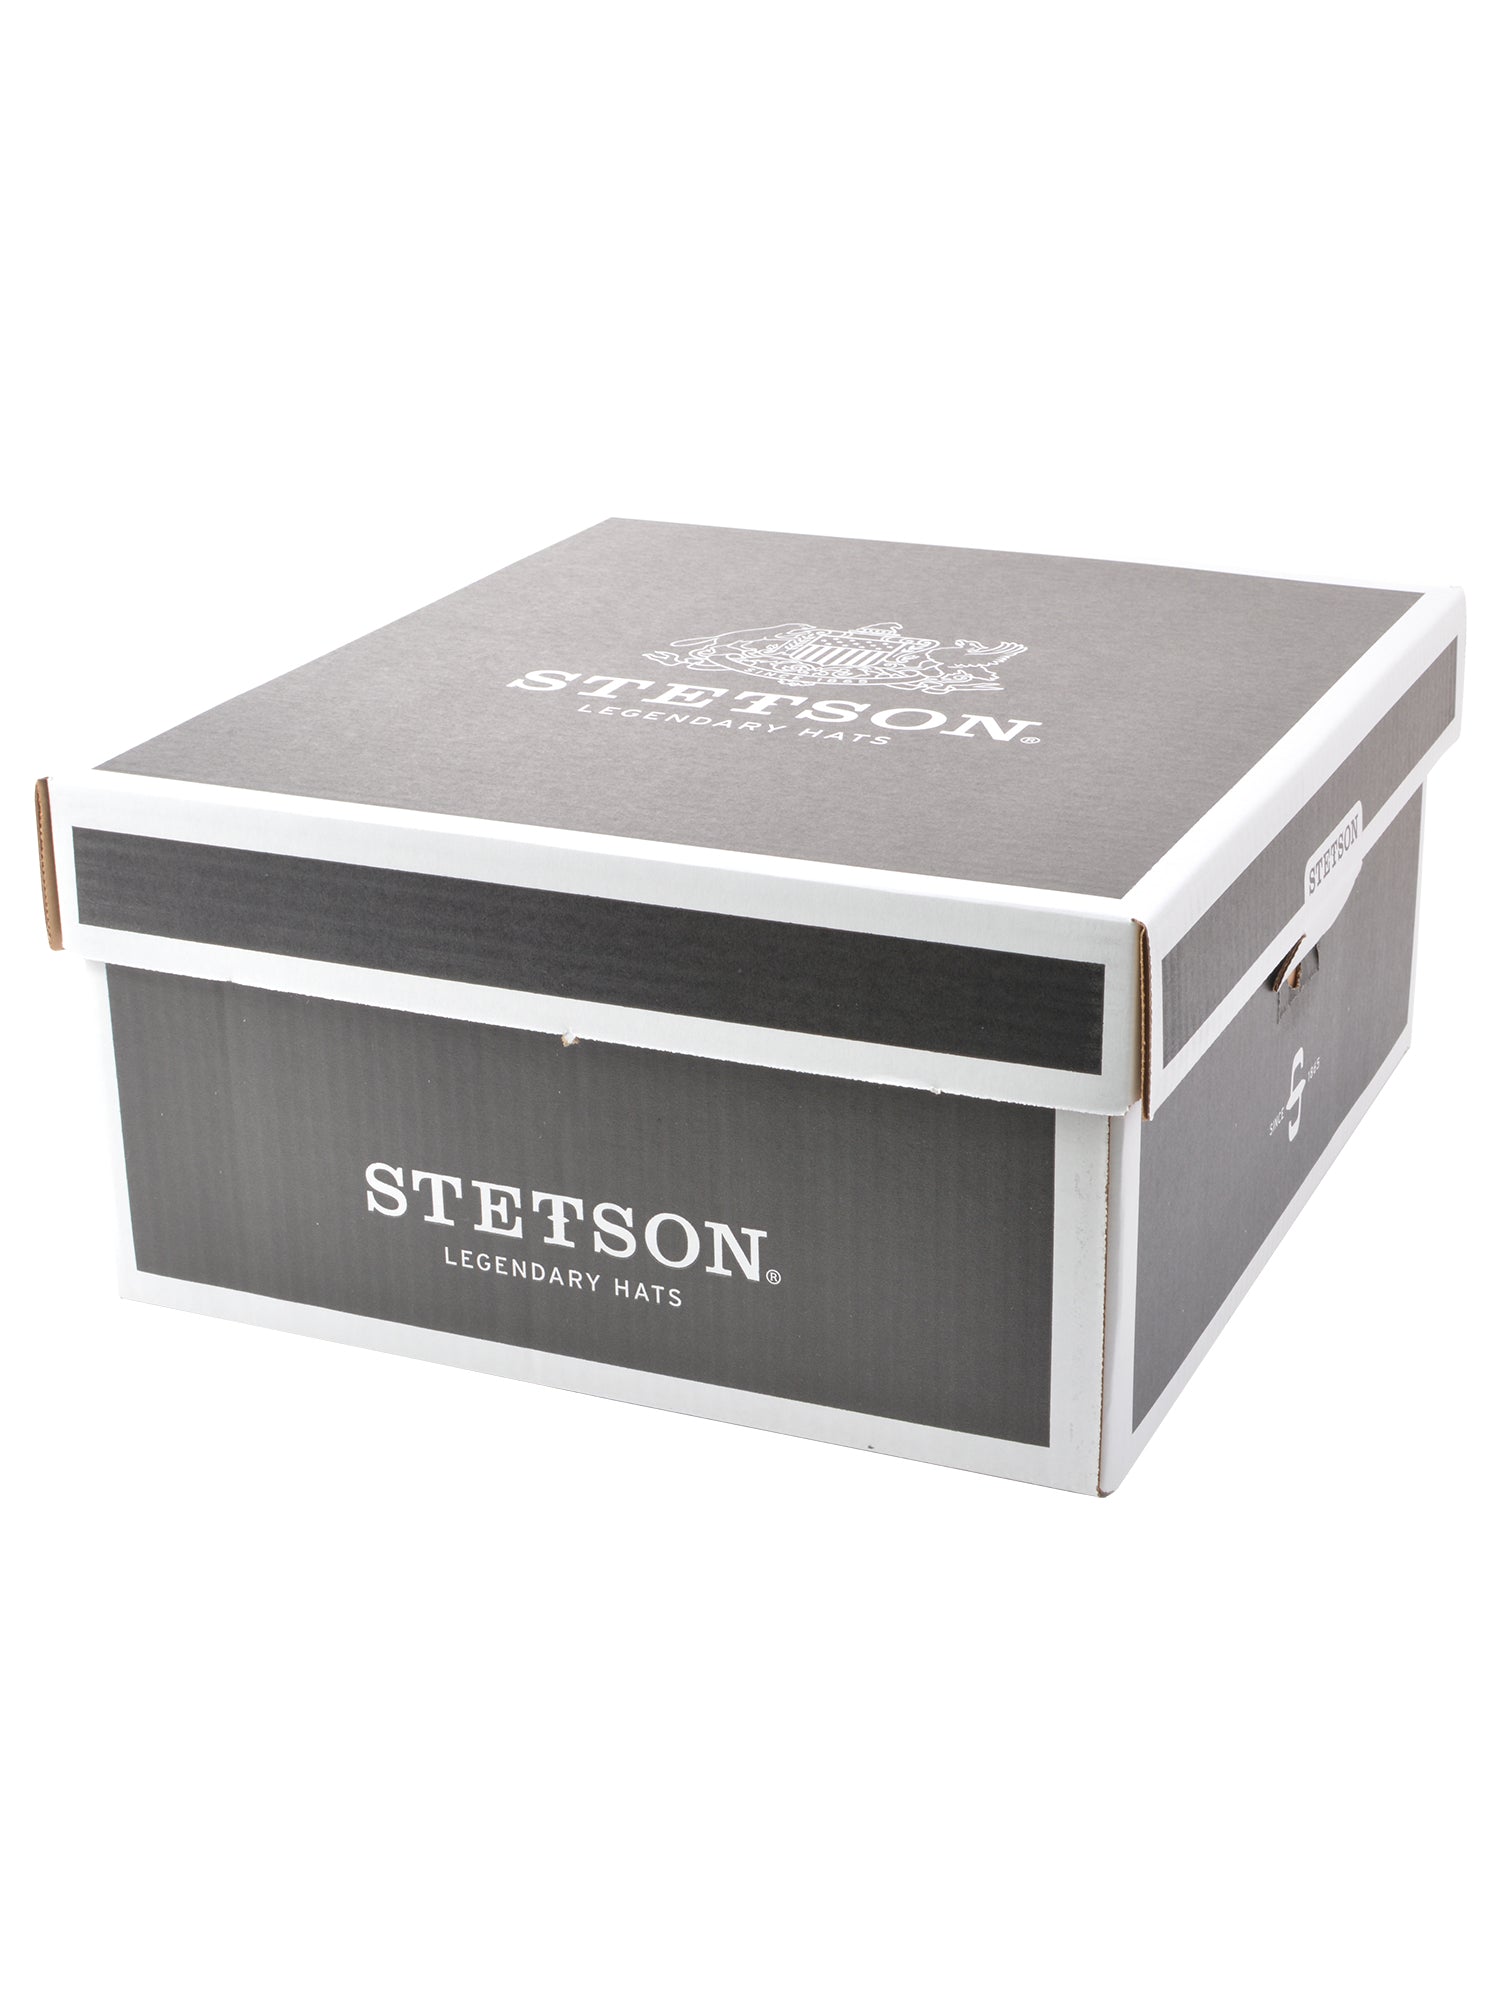 Stetson Ron Donegan Shantung Straw Hat with Hat Box